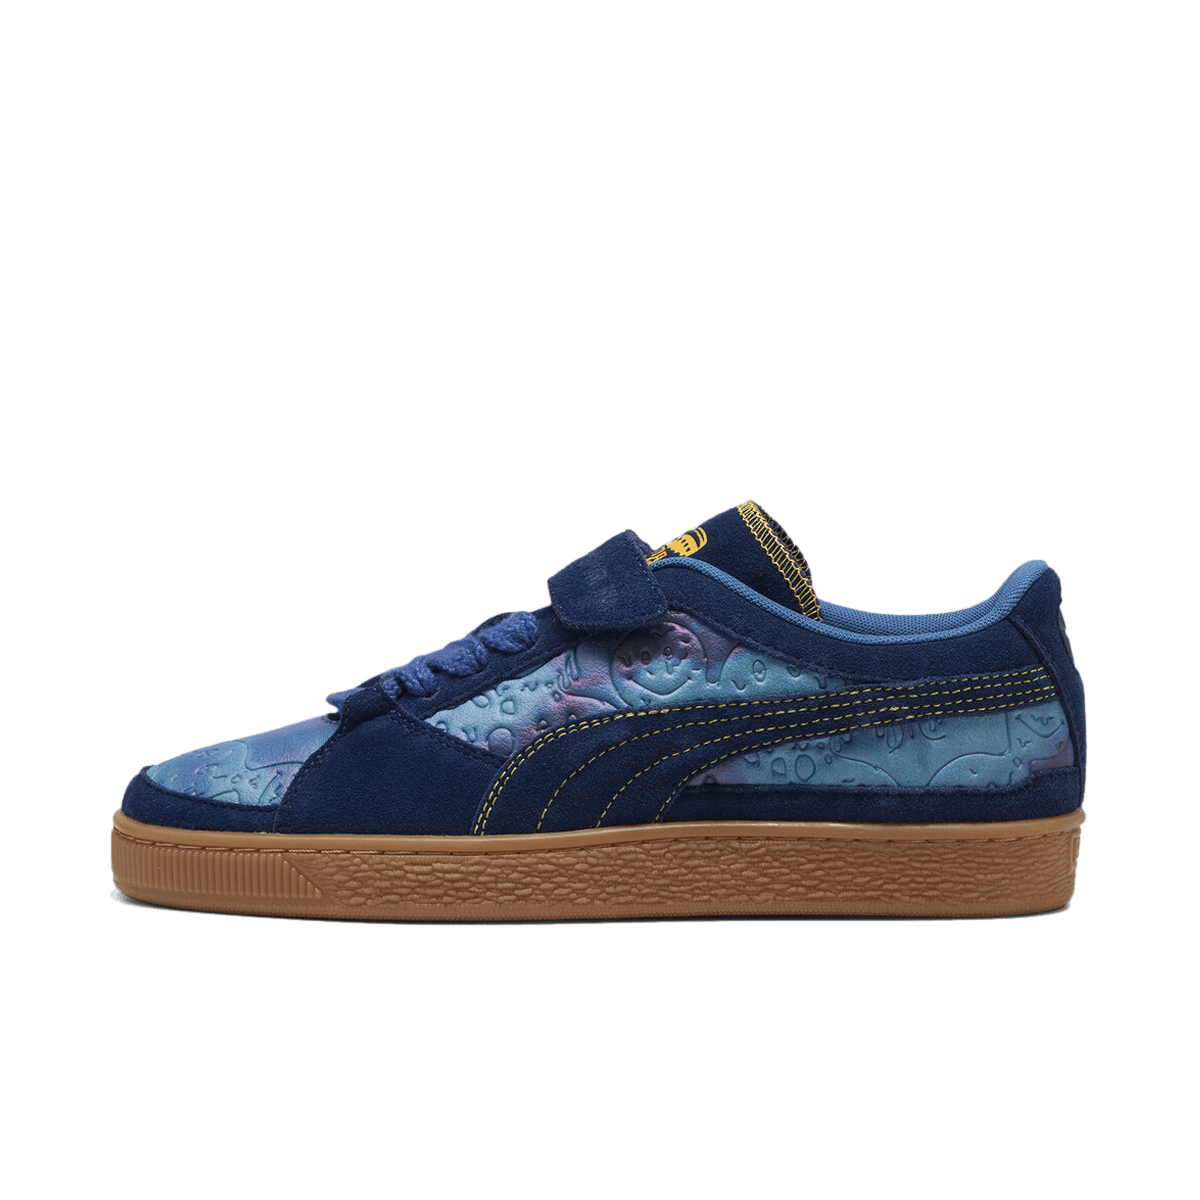 Dazed and Confused x Puma Suede 'Persian Blue'